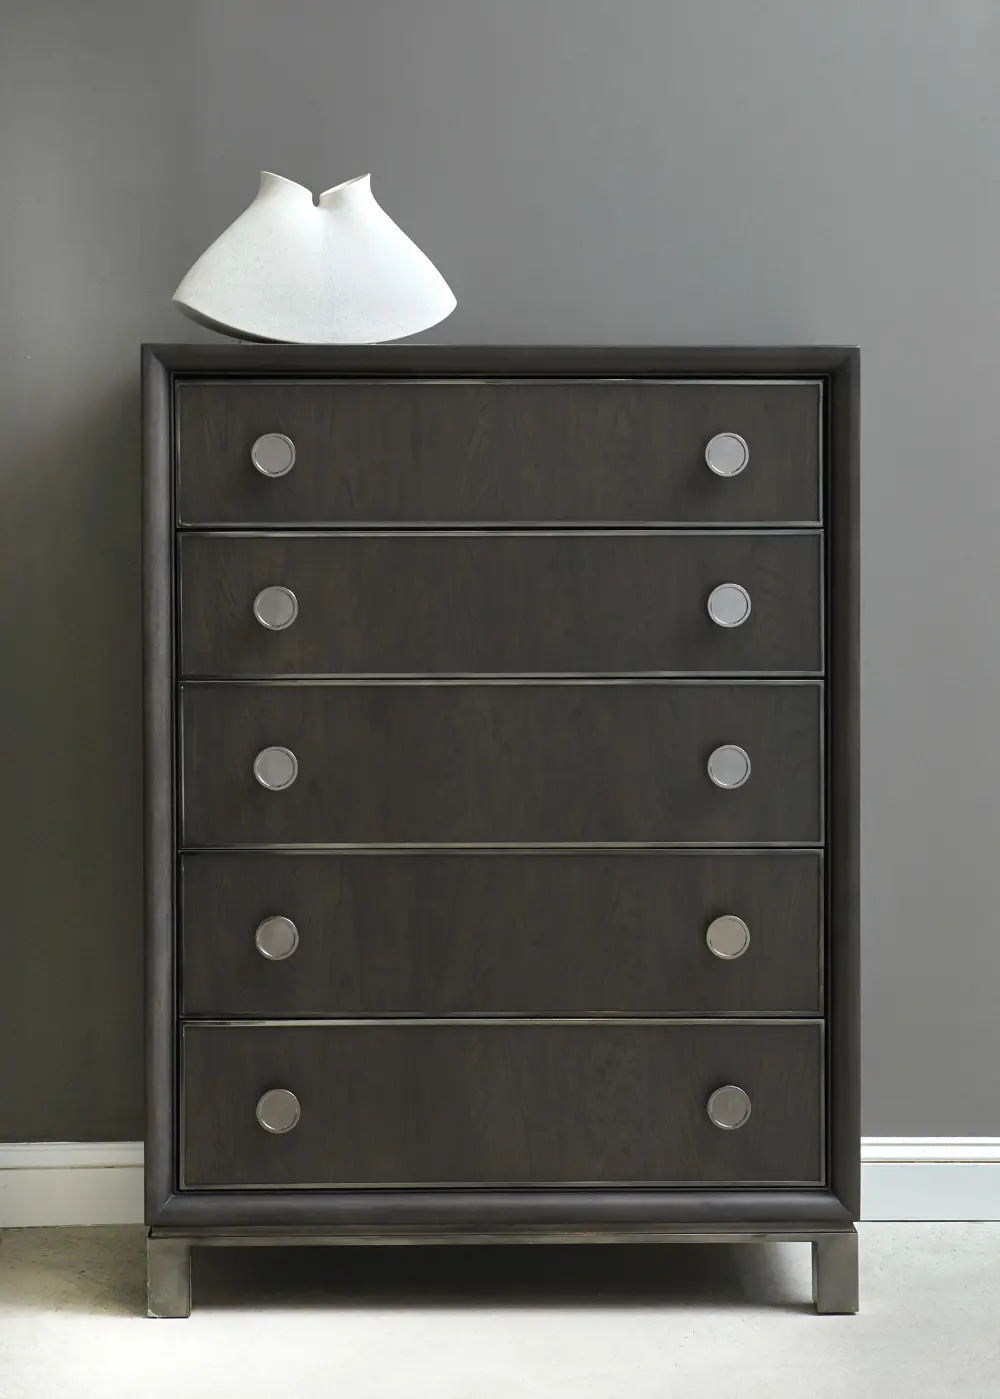 Contemporary Black and Nickel Chest of Drawers - Radiance Space-1